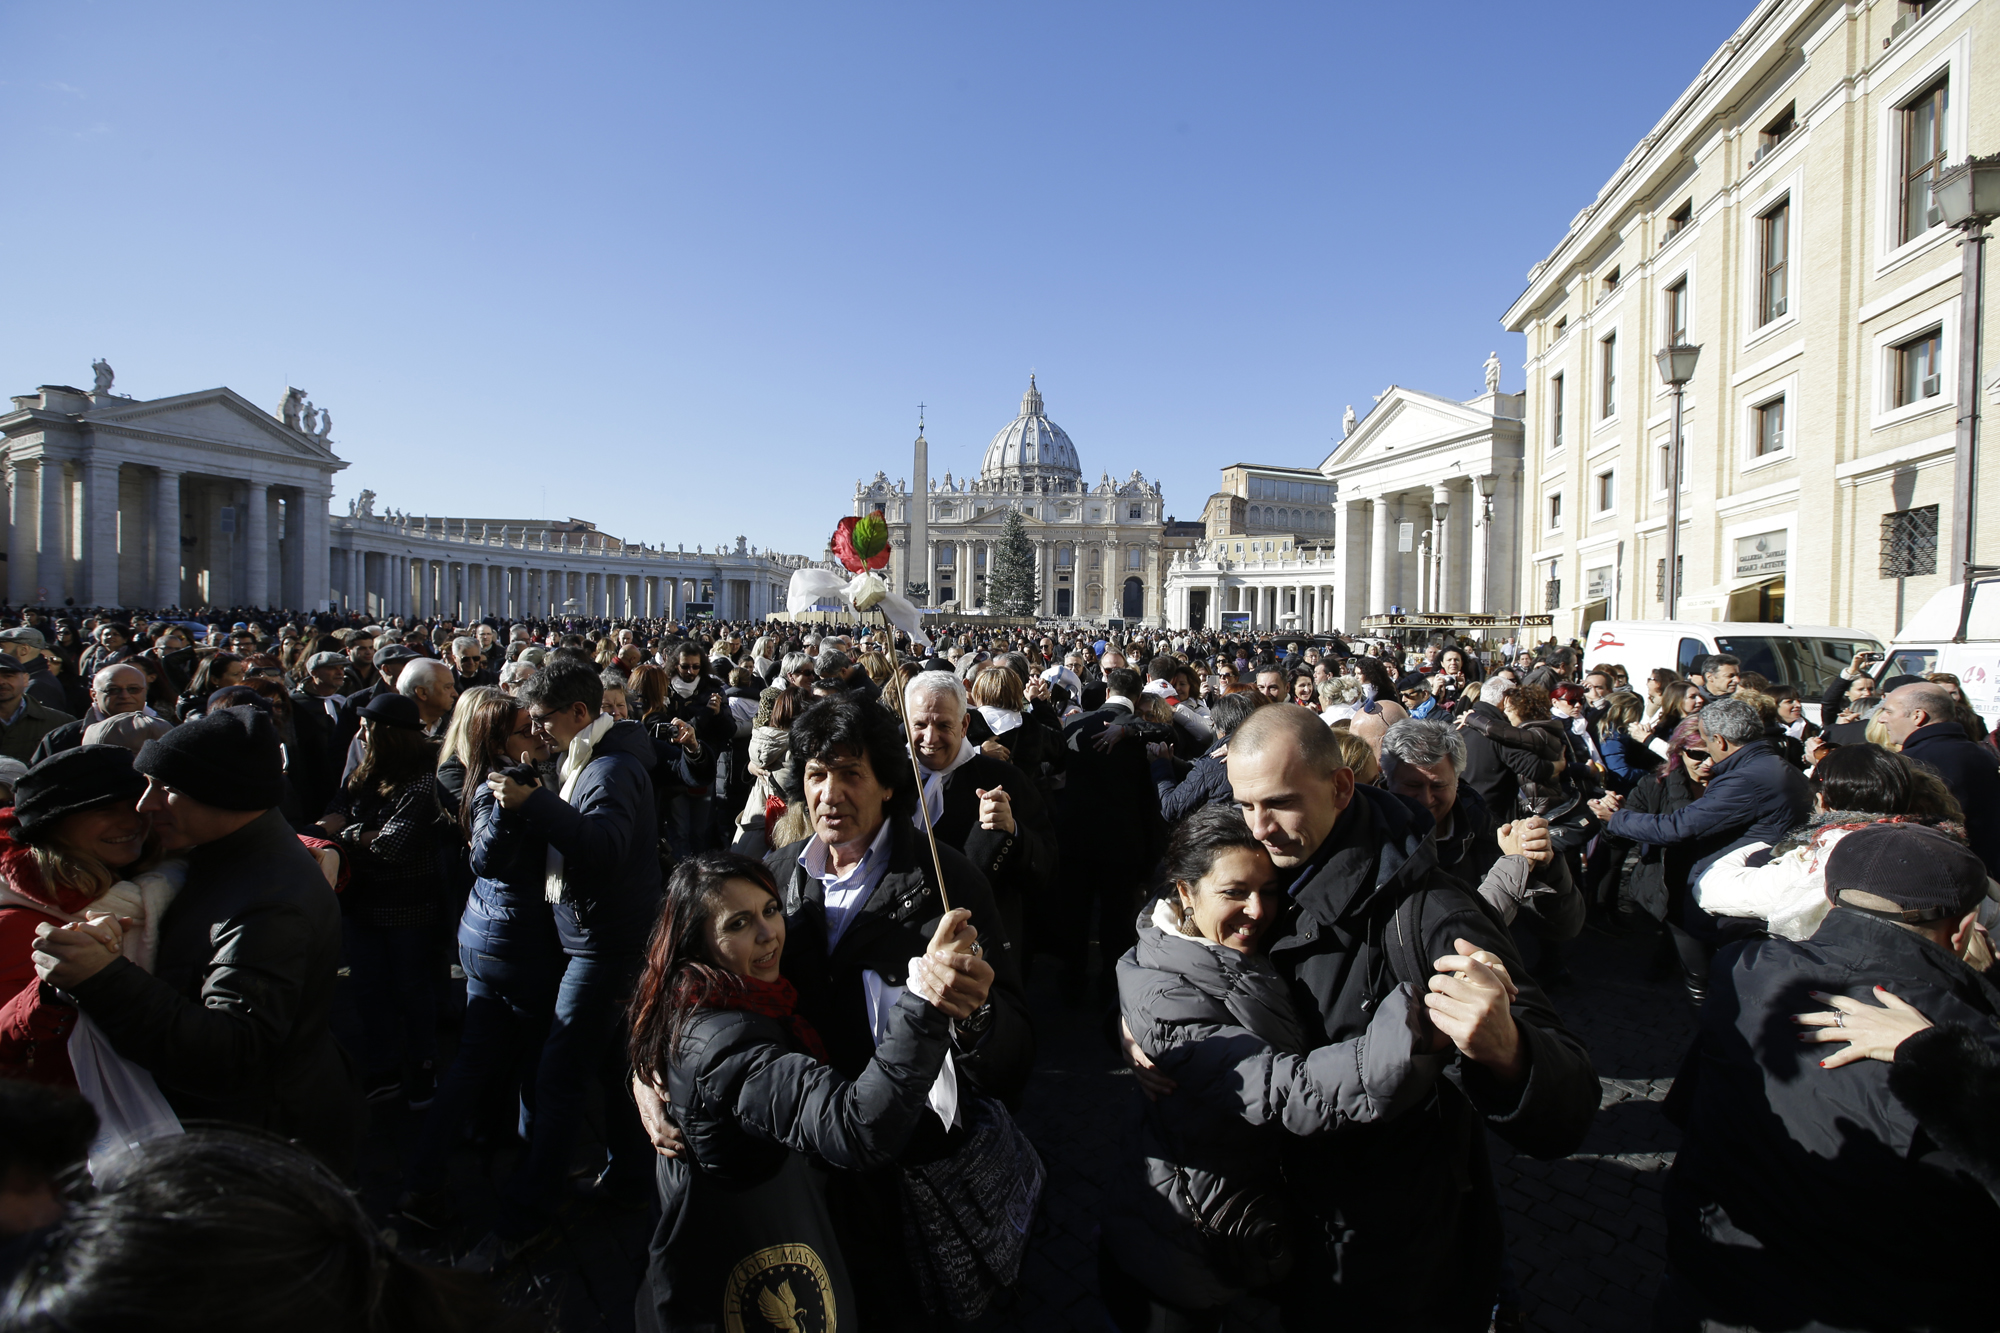 PHOTO: People dance tango in front of St. Peter's Square to celebrate Pope Francis 78th birthday, at the Vatican on Dec. 17, 2014.